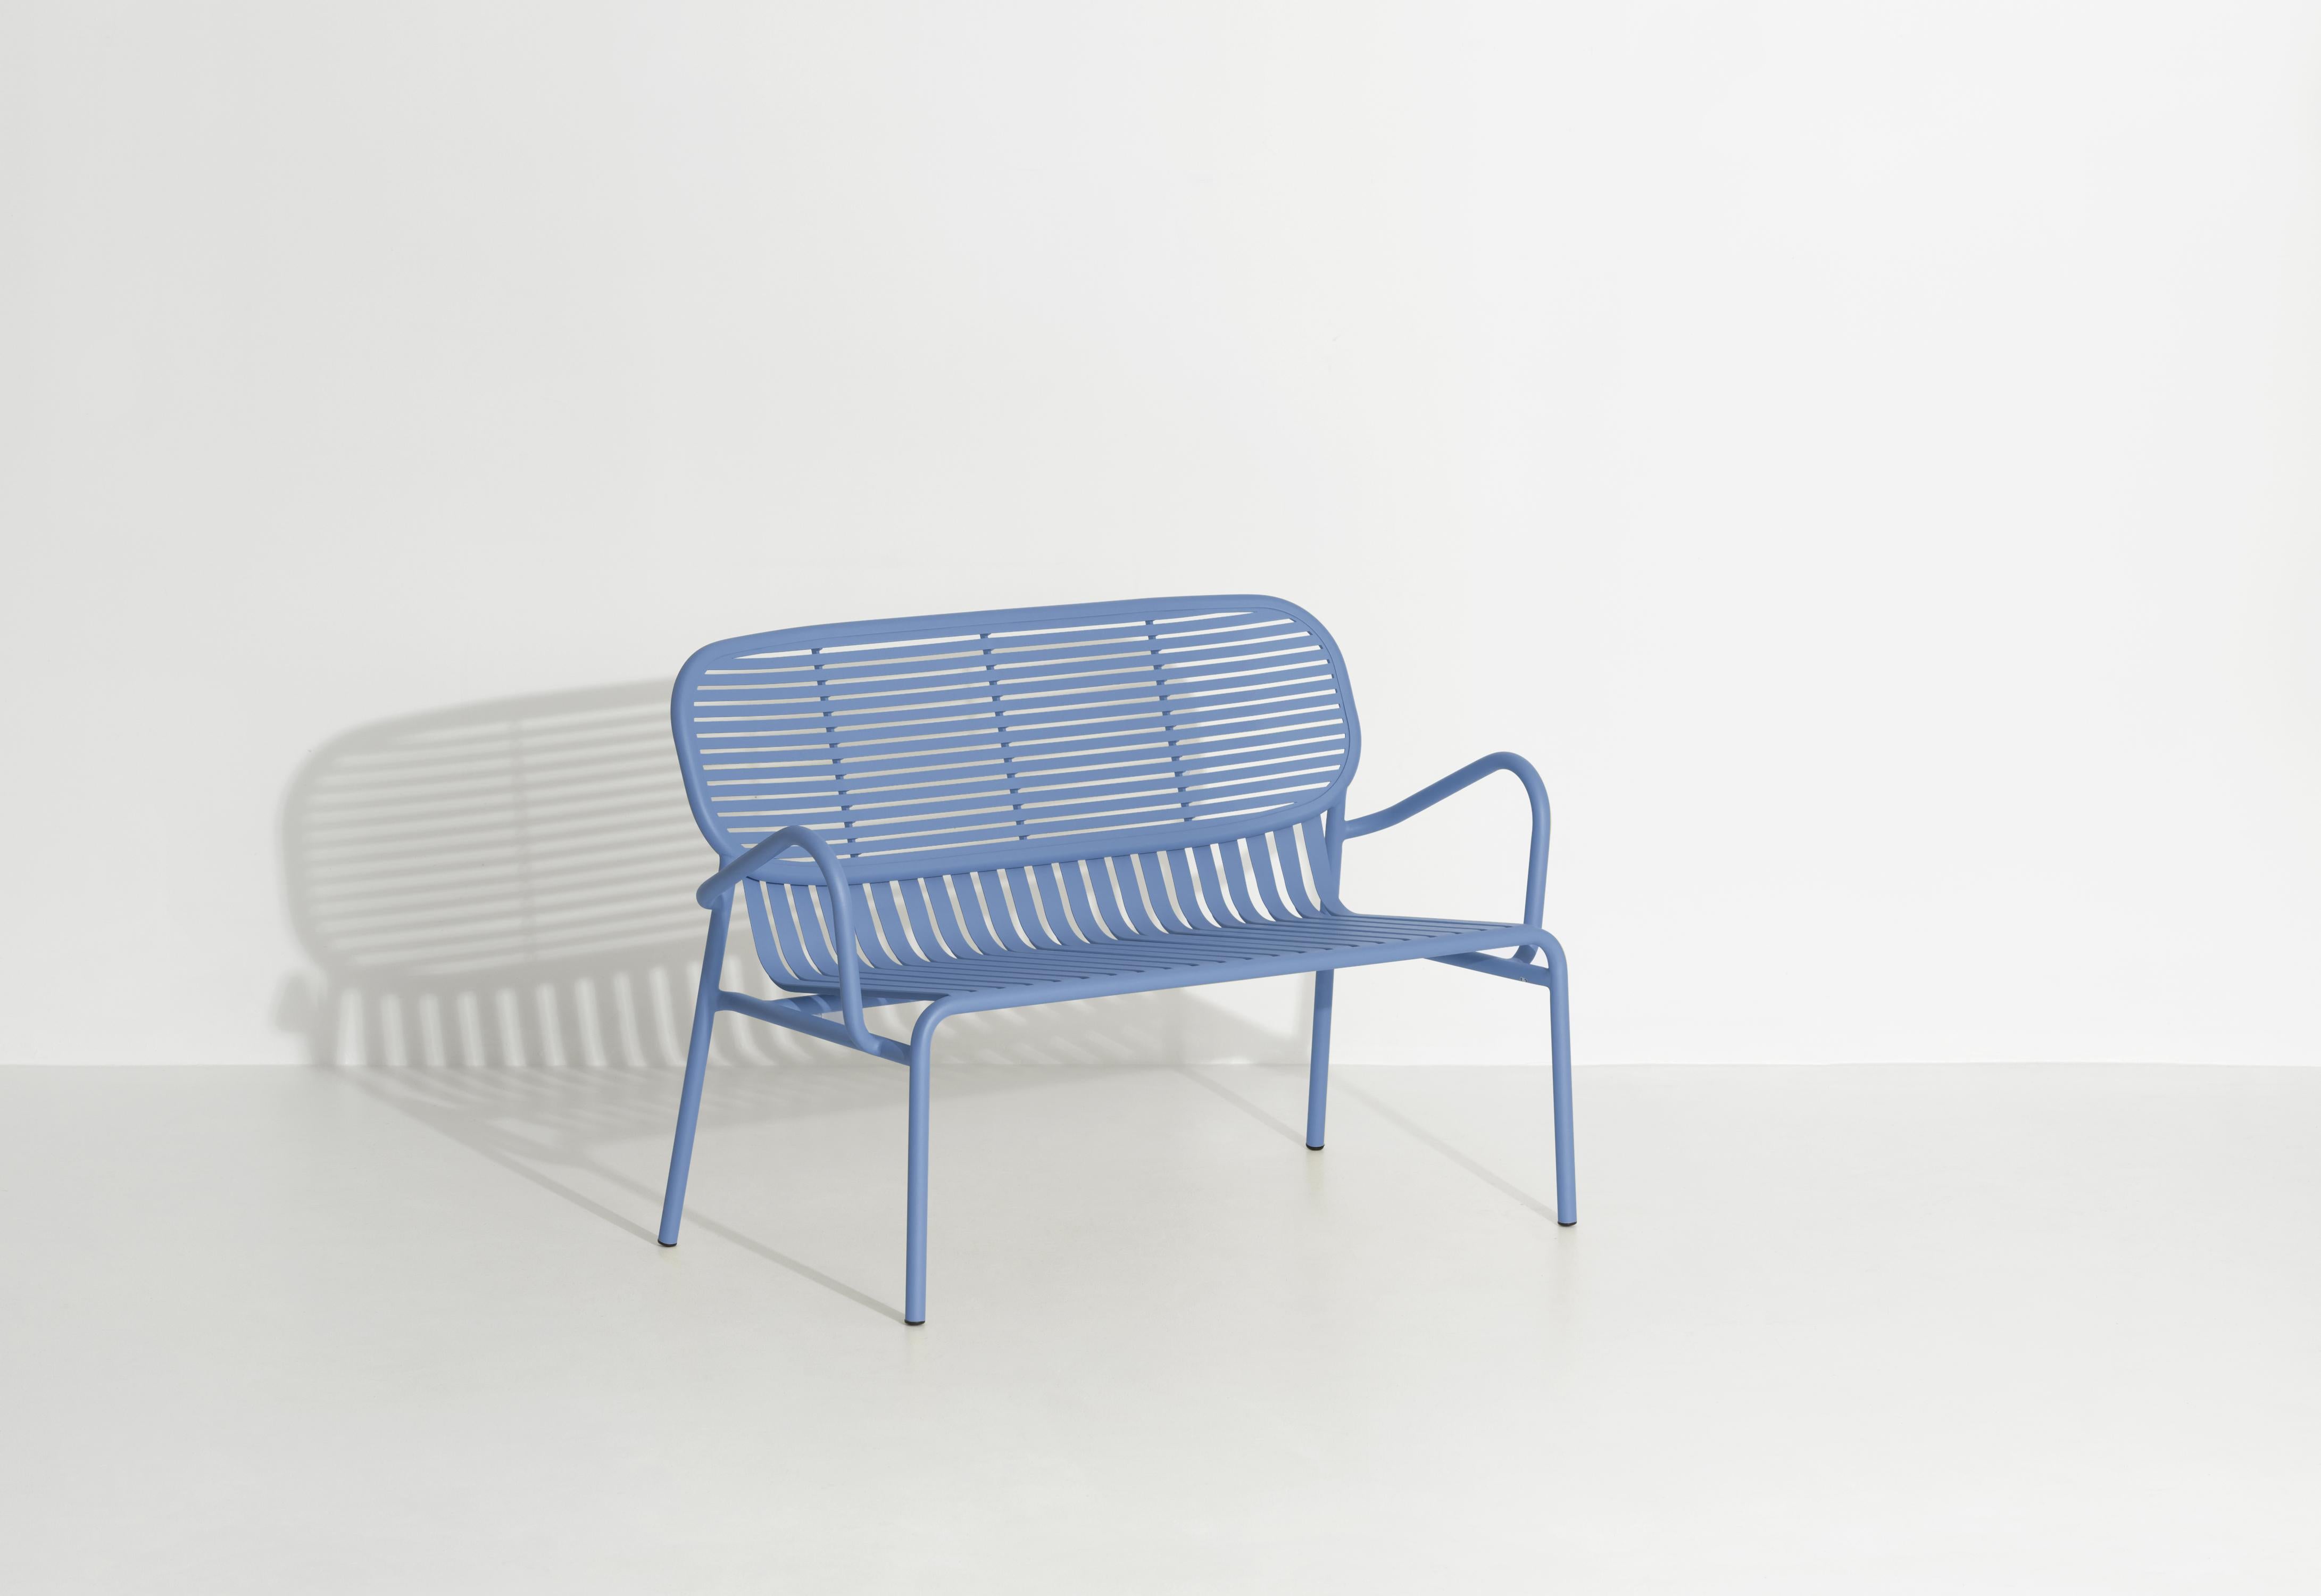 Petite Friture Week-End Sofa in Azur Blue Aluminium by Studio BrichetZiegler, 2017

The week-end collection is a full range of outdoor furniture, in aluminium grained epoxy paint, matt finish, that includes 18 functions and 8 colours for the